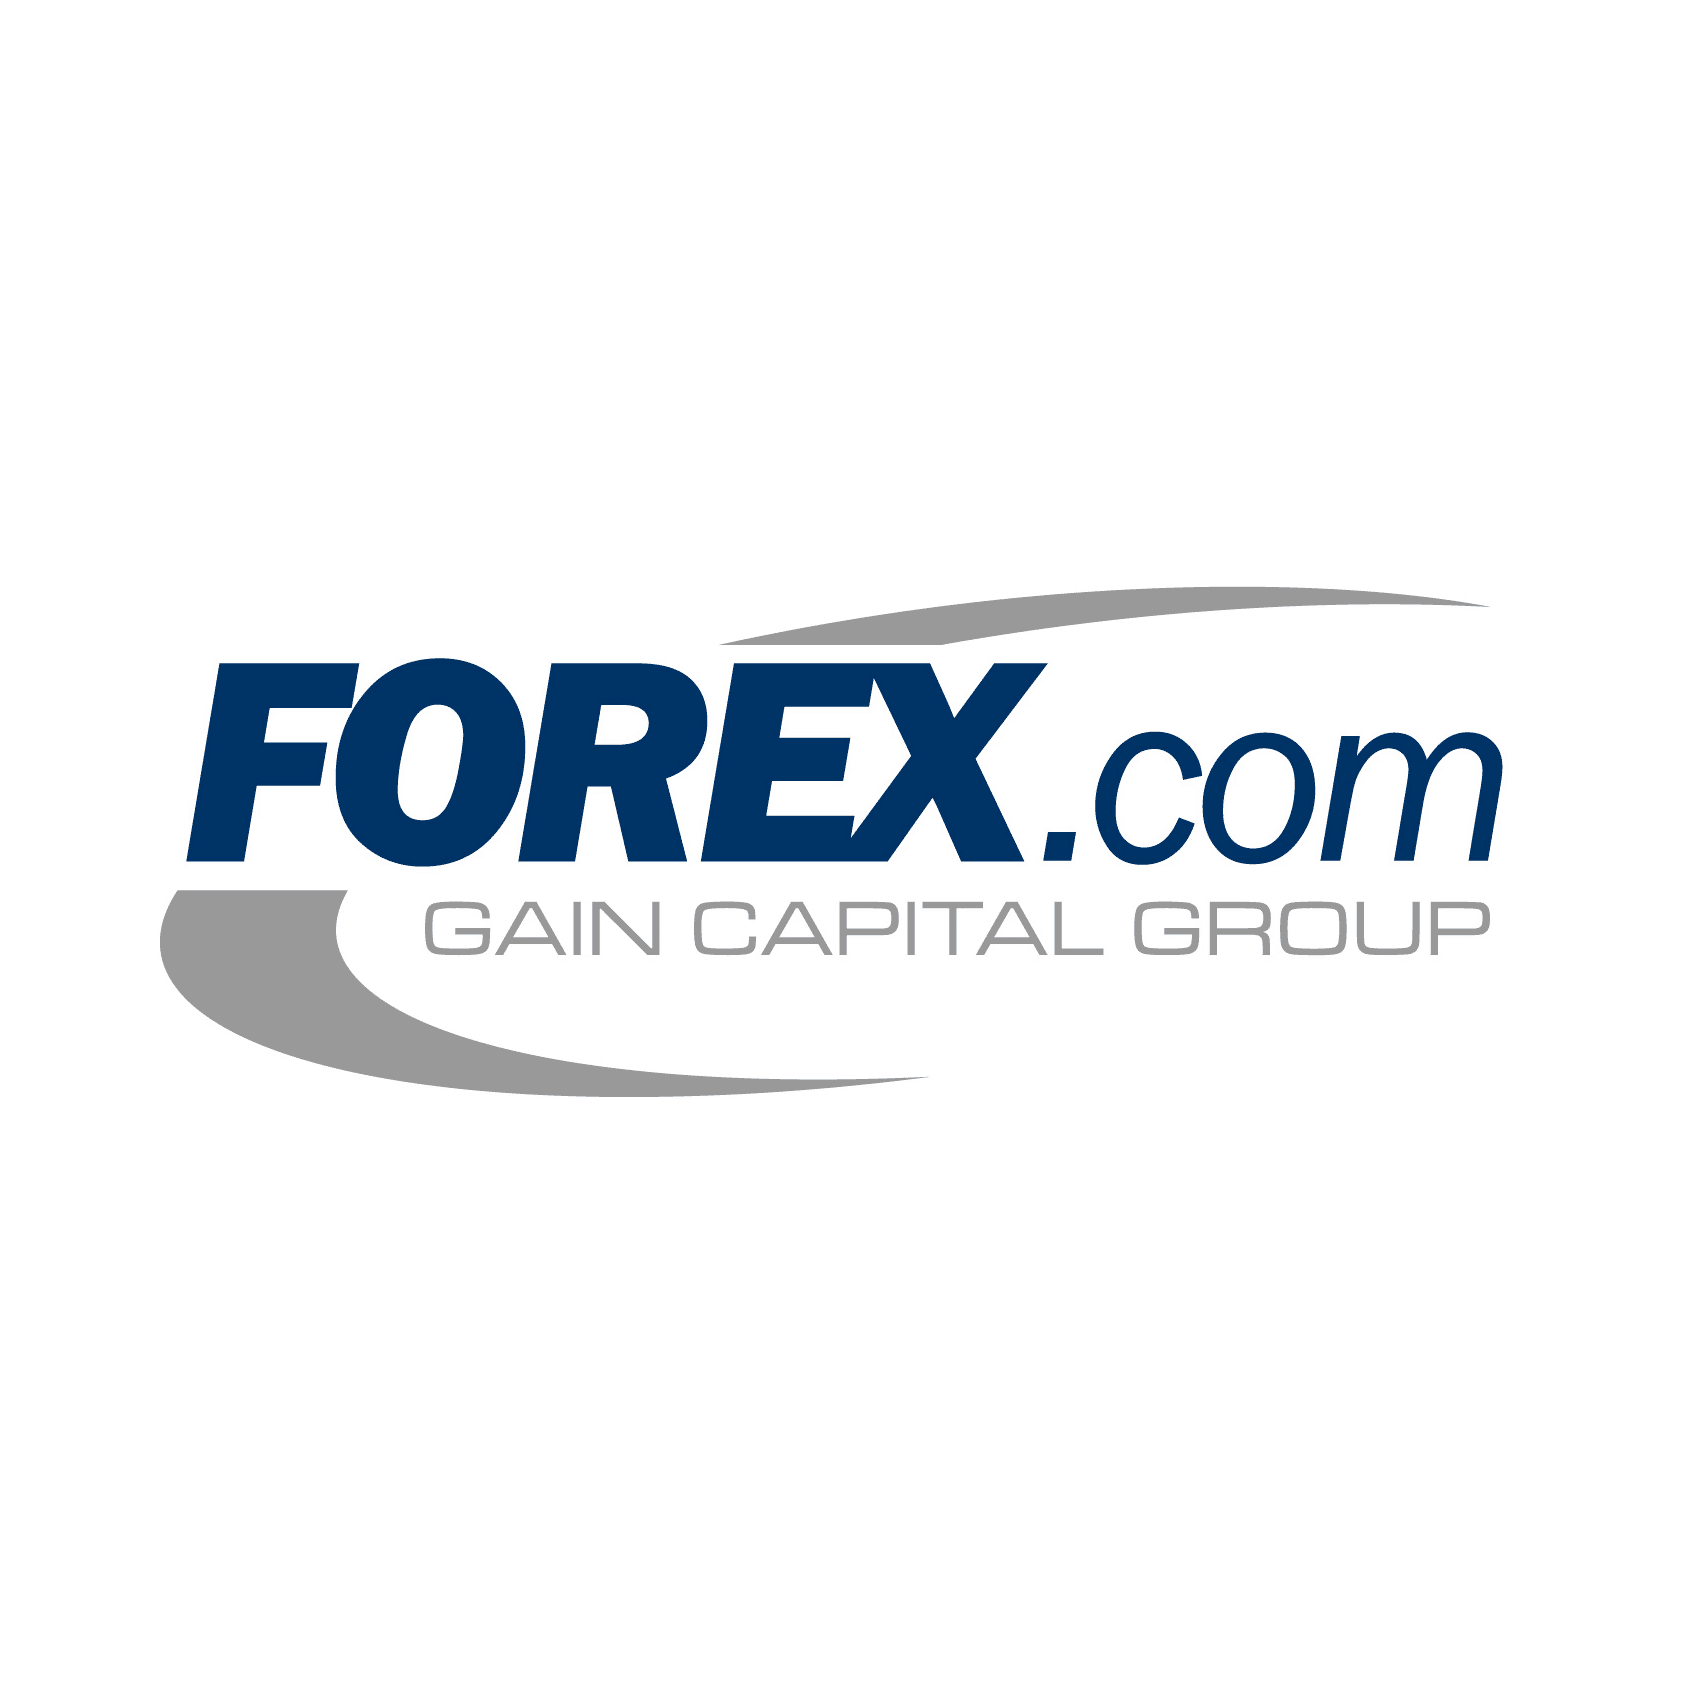 Forex.com Asks Clients to Respond to ESMA Rules Proposals